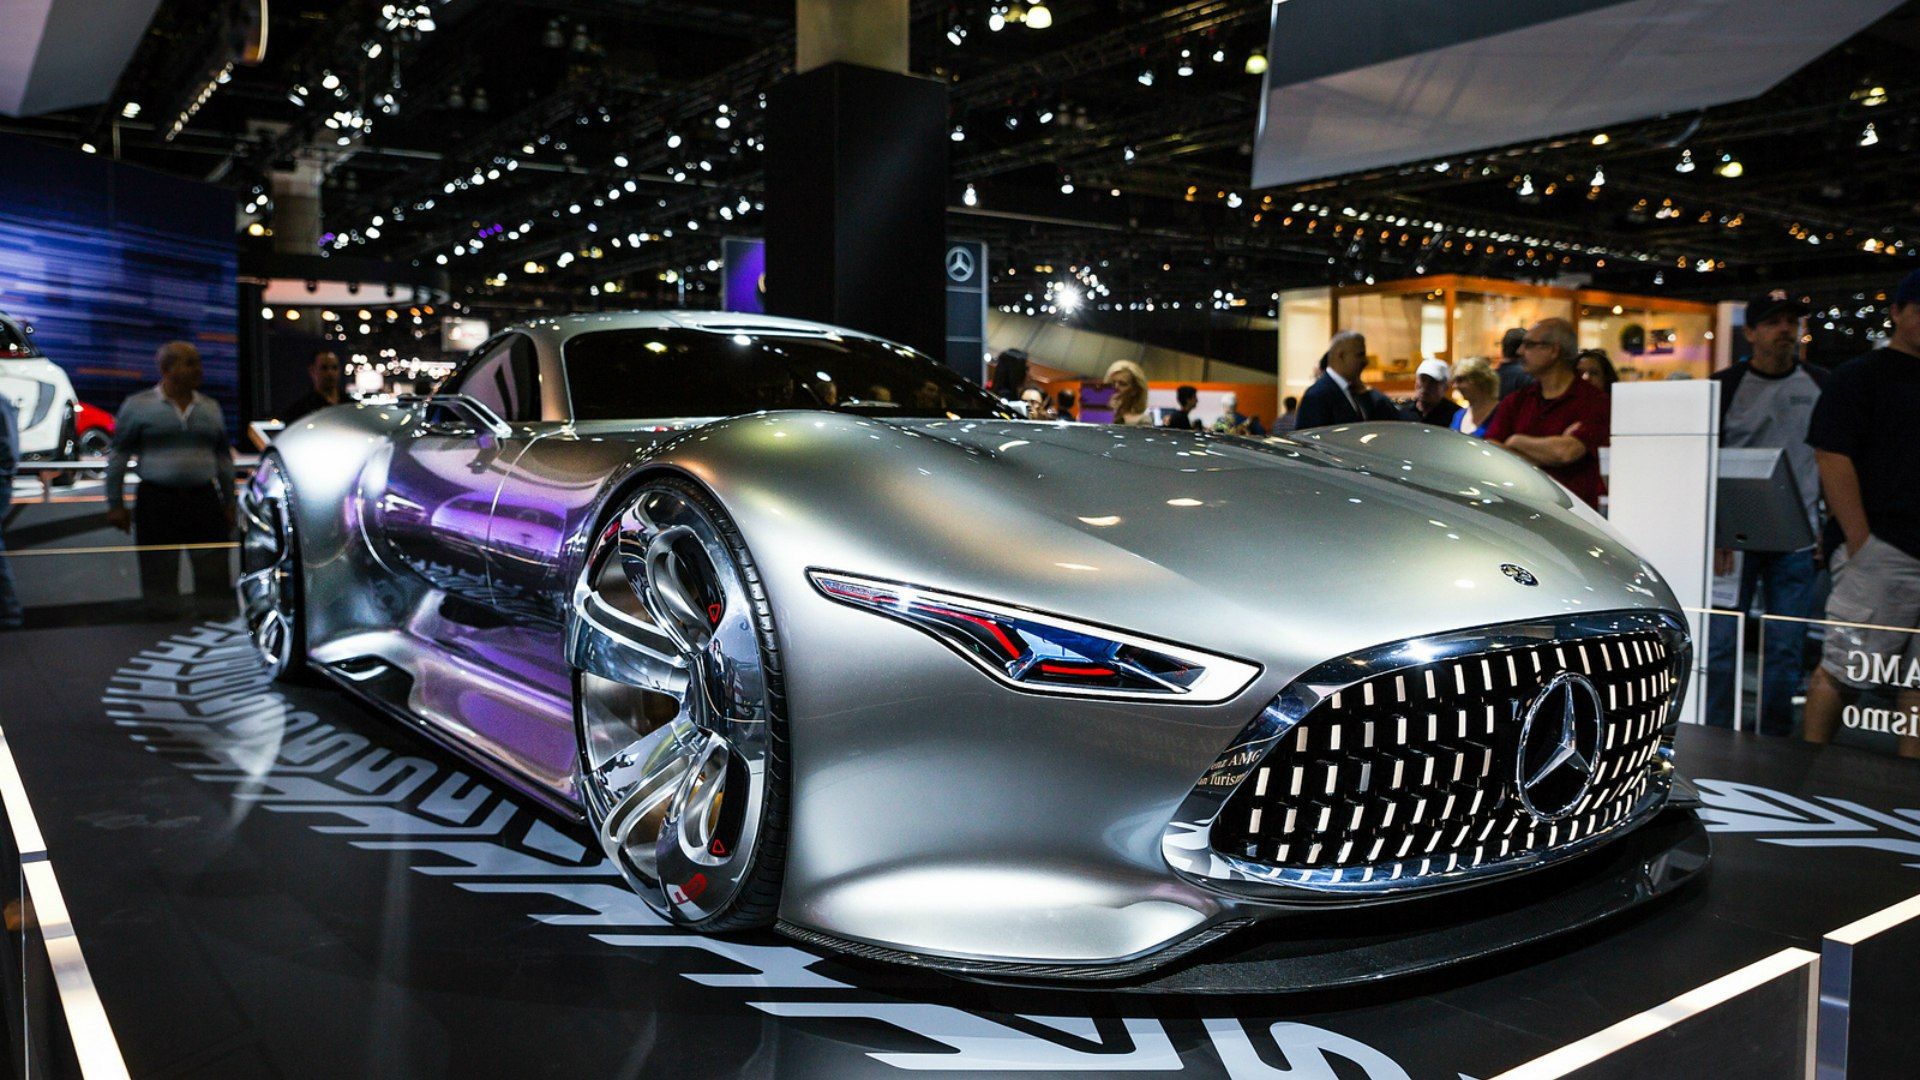 Striking Mercedes Benz AMG Vision Gran Turismo Wallpaper And Image, Picture, Photo